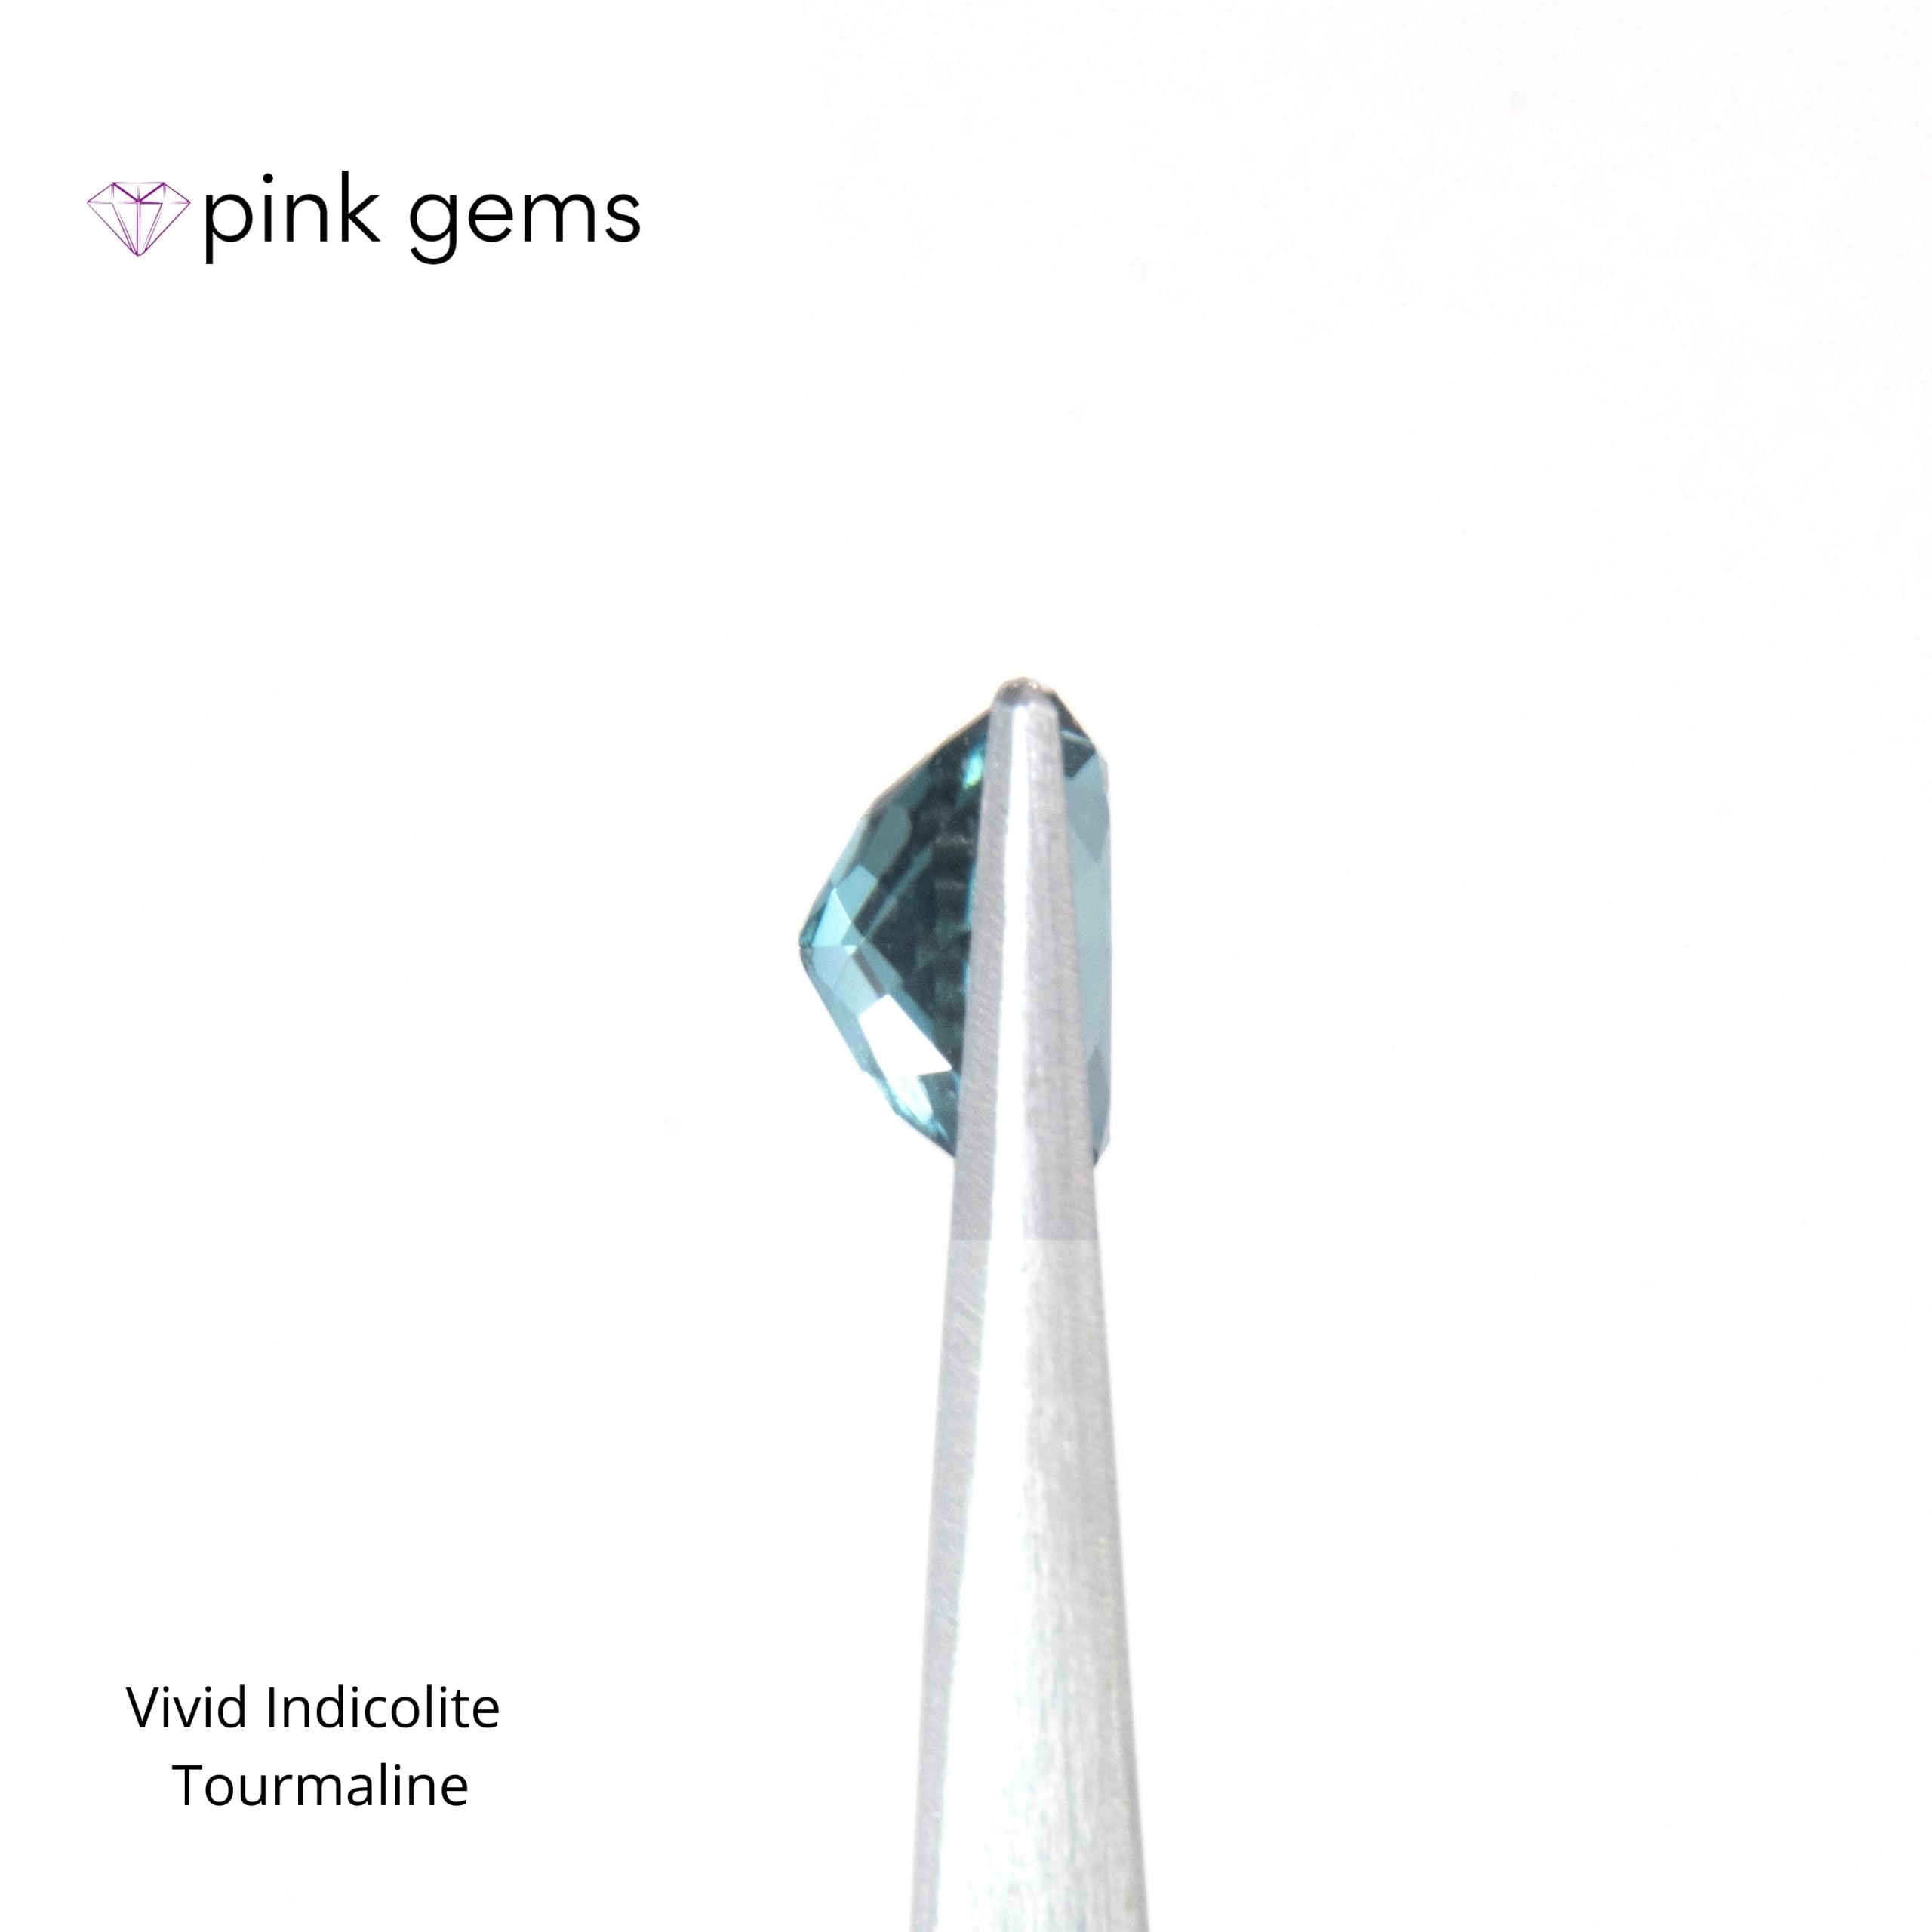 The Pink Gems